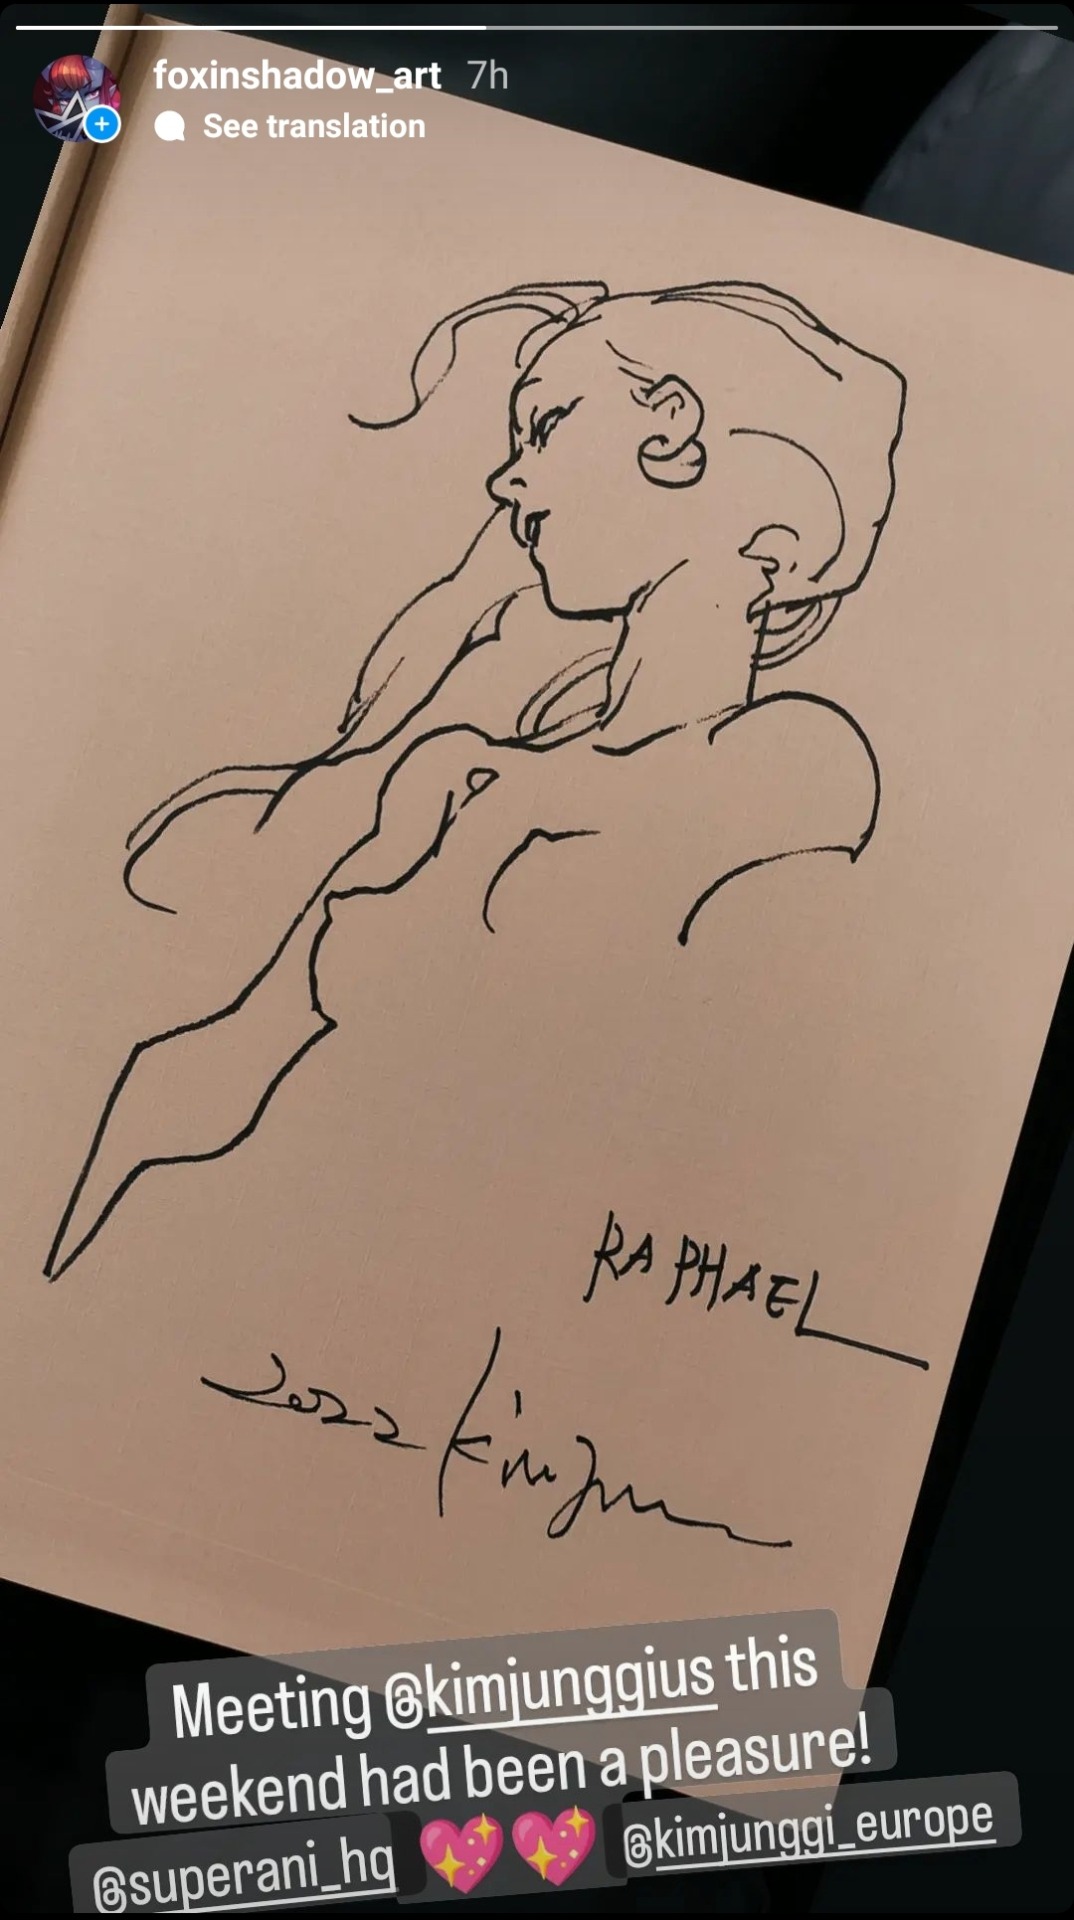 Very tired after an eventful weekend but it was all worth the trouble of making the trip to see @KimJungGiUS perform live with his mesmerizing skills; I’ve had the rare pleasure of getting one of his art books they signed for me right there at the